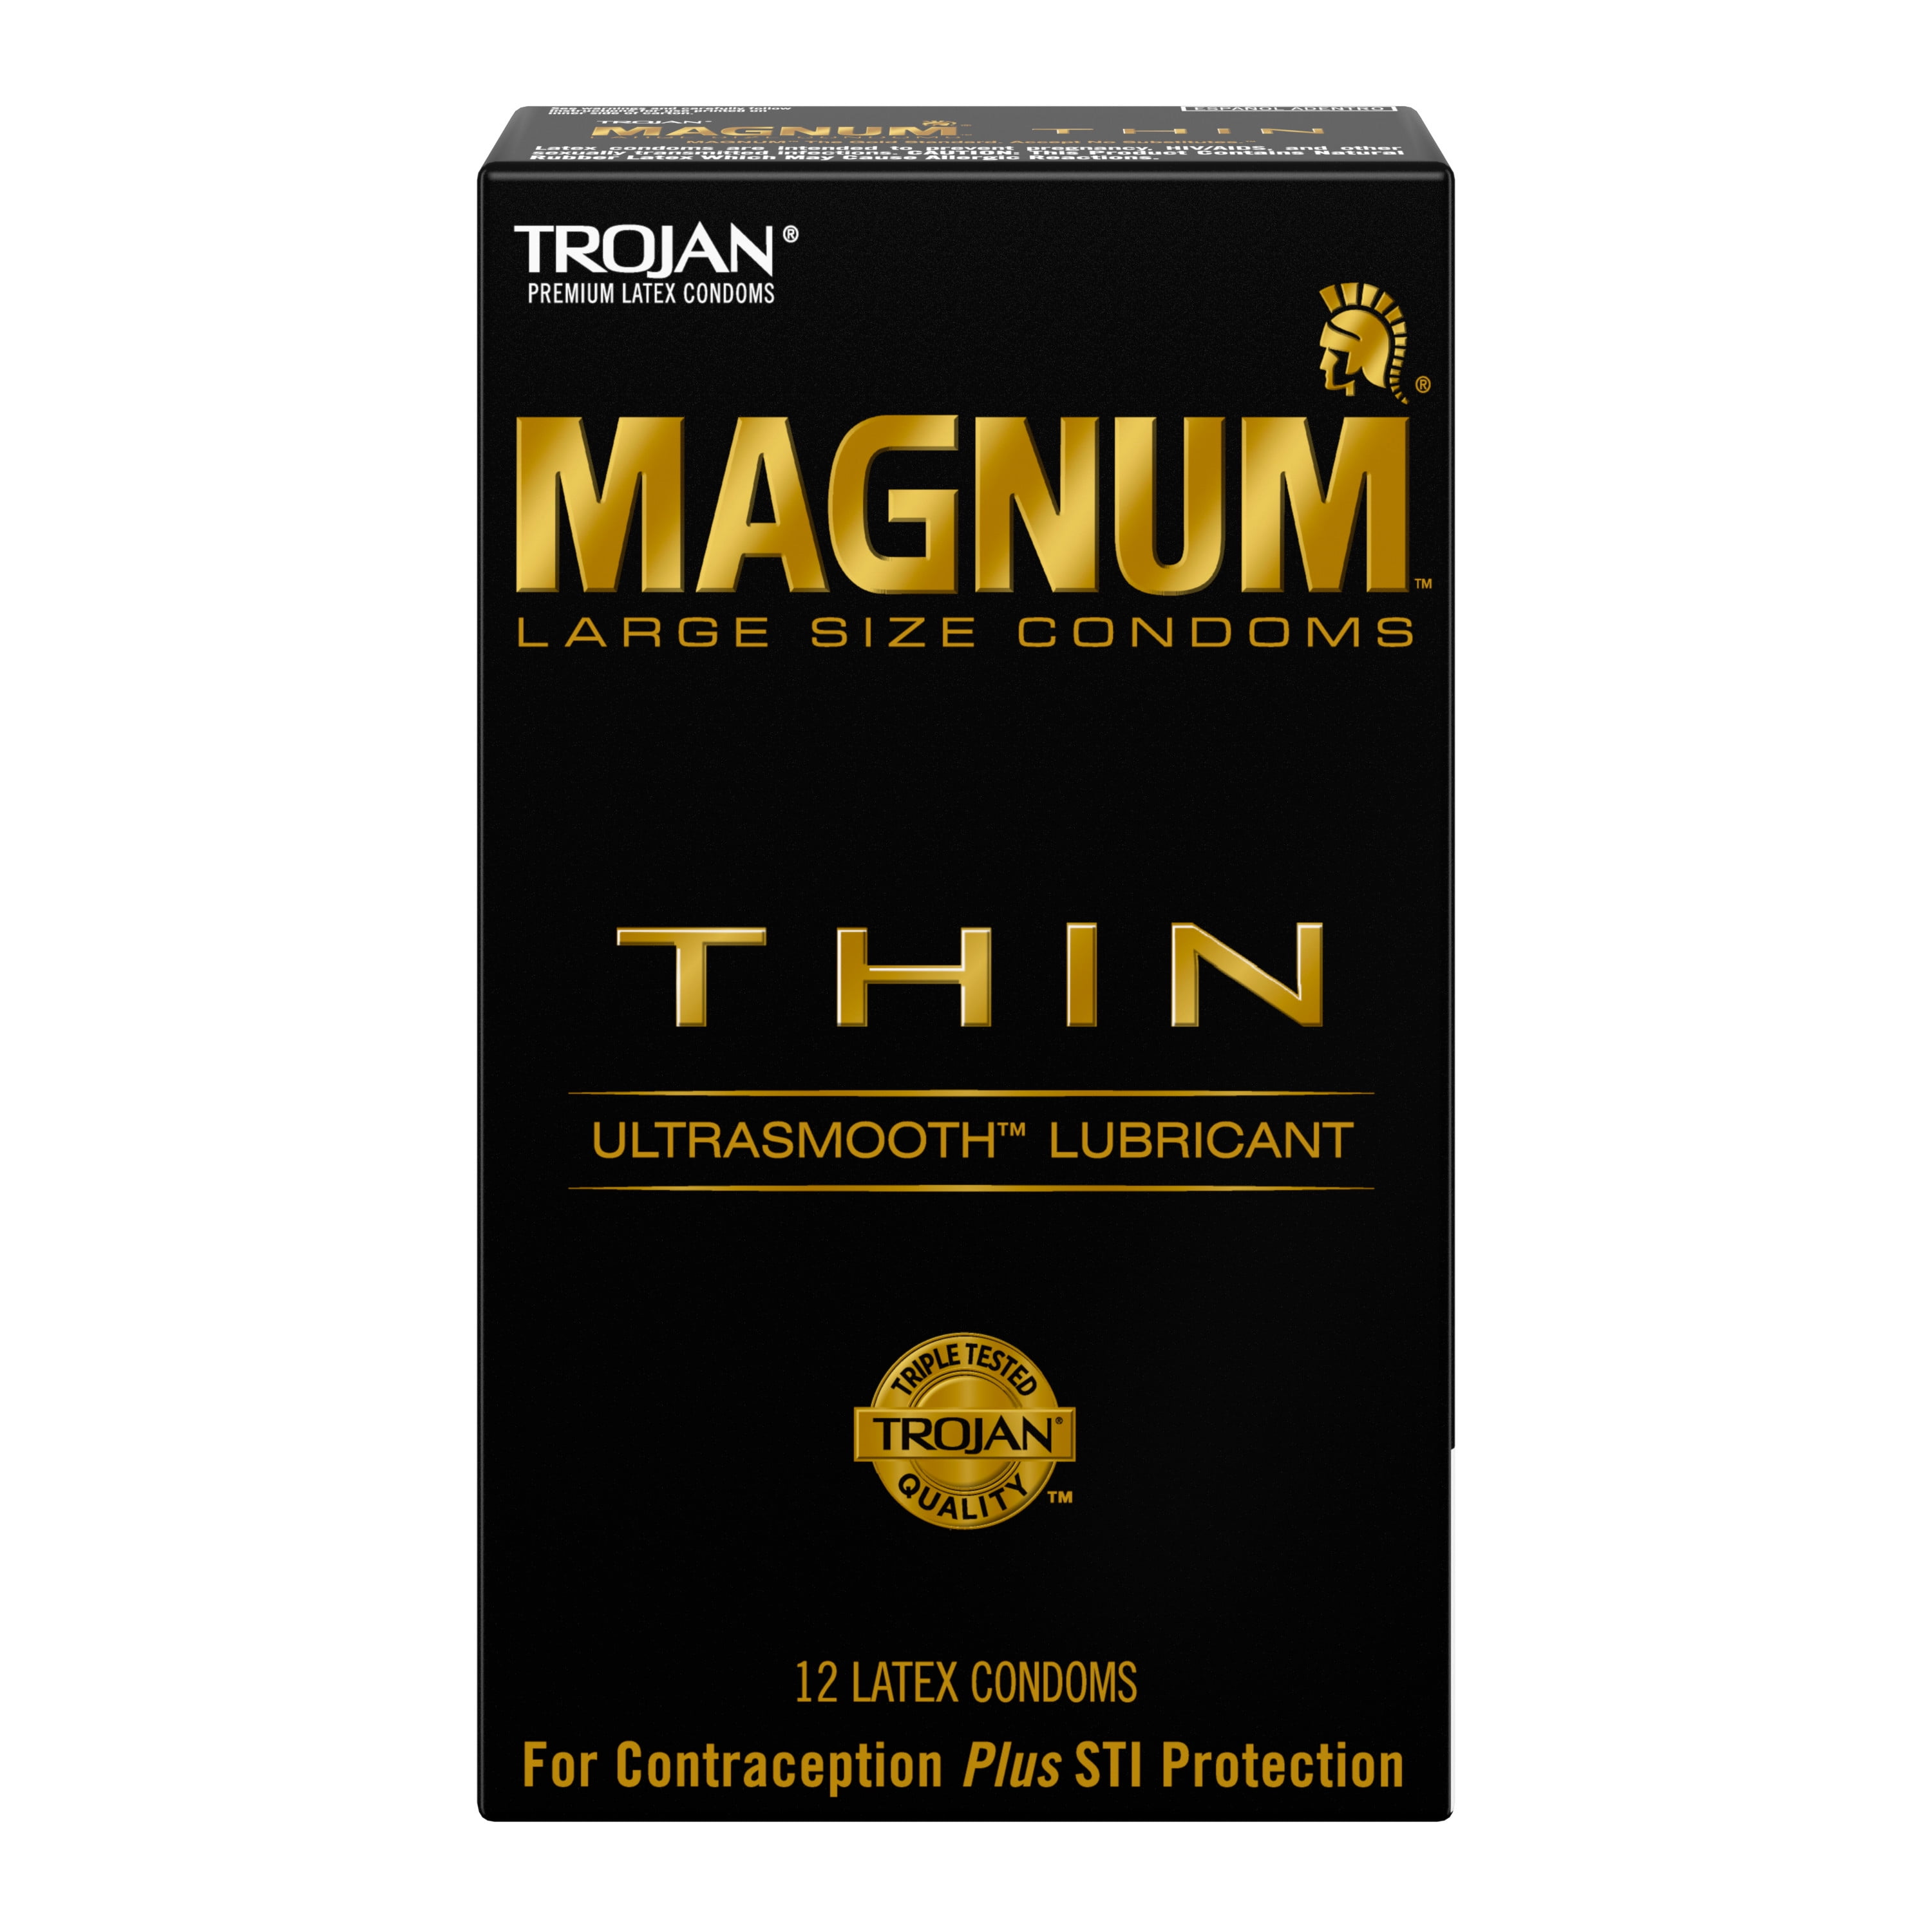 TROJAN Magnum Thin Large Size Lubricated Condoms, 12 Count